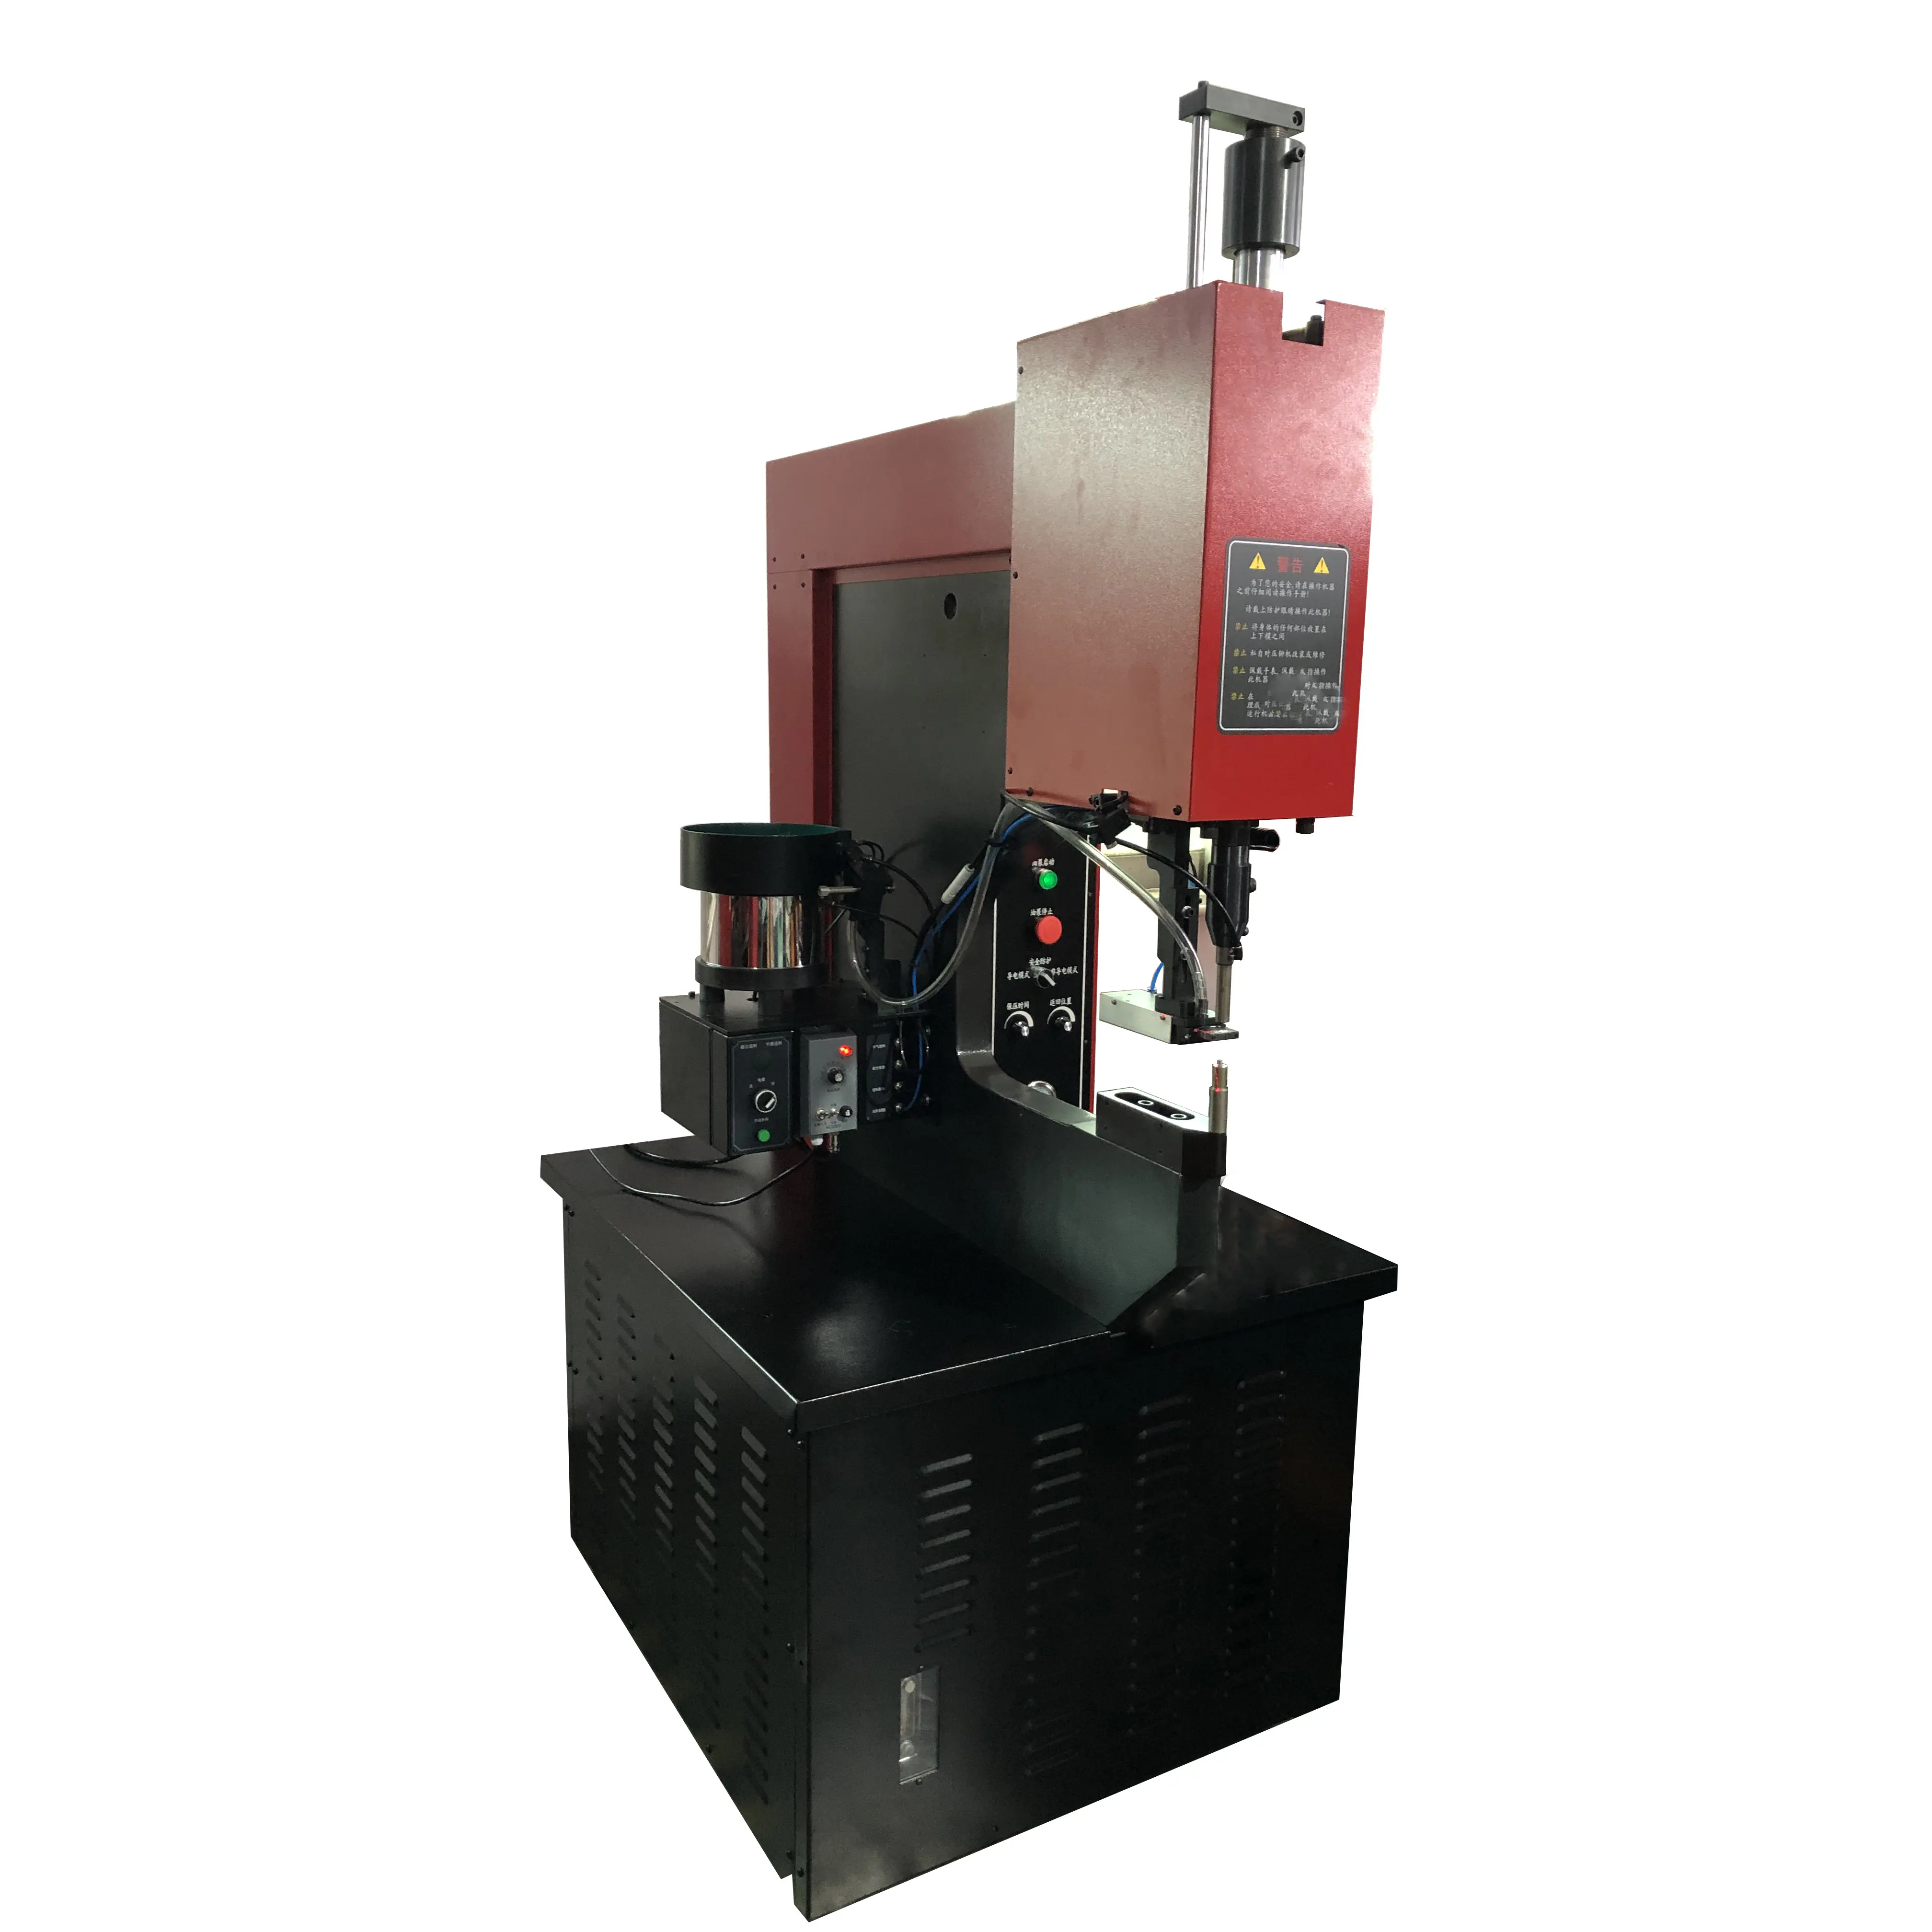 Usun Model : ULYP-618 10 tons auto feeding Nuts Insertion Press machine with safety device for Screws up to M8